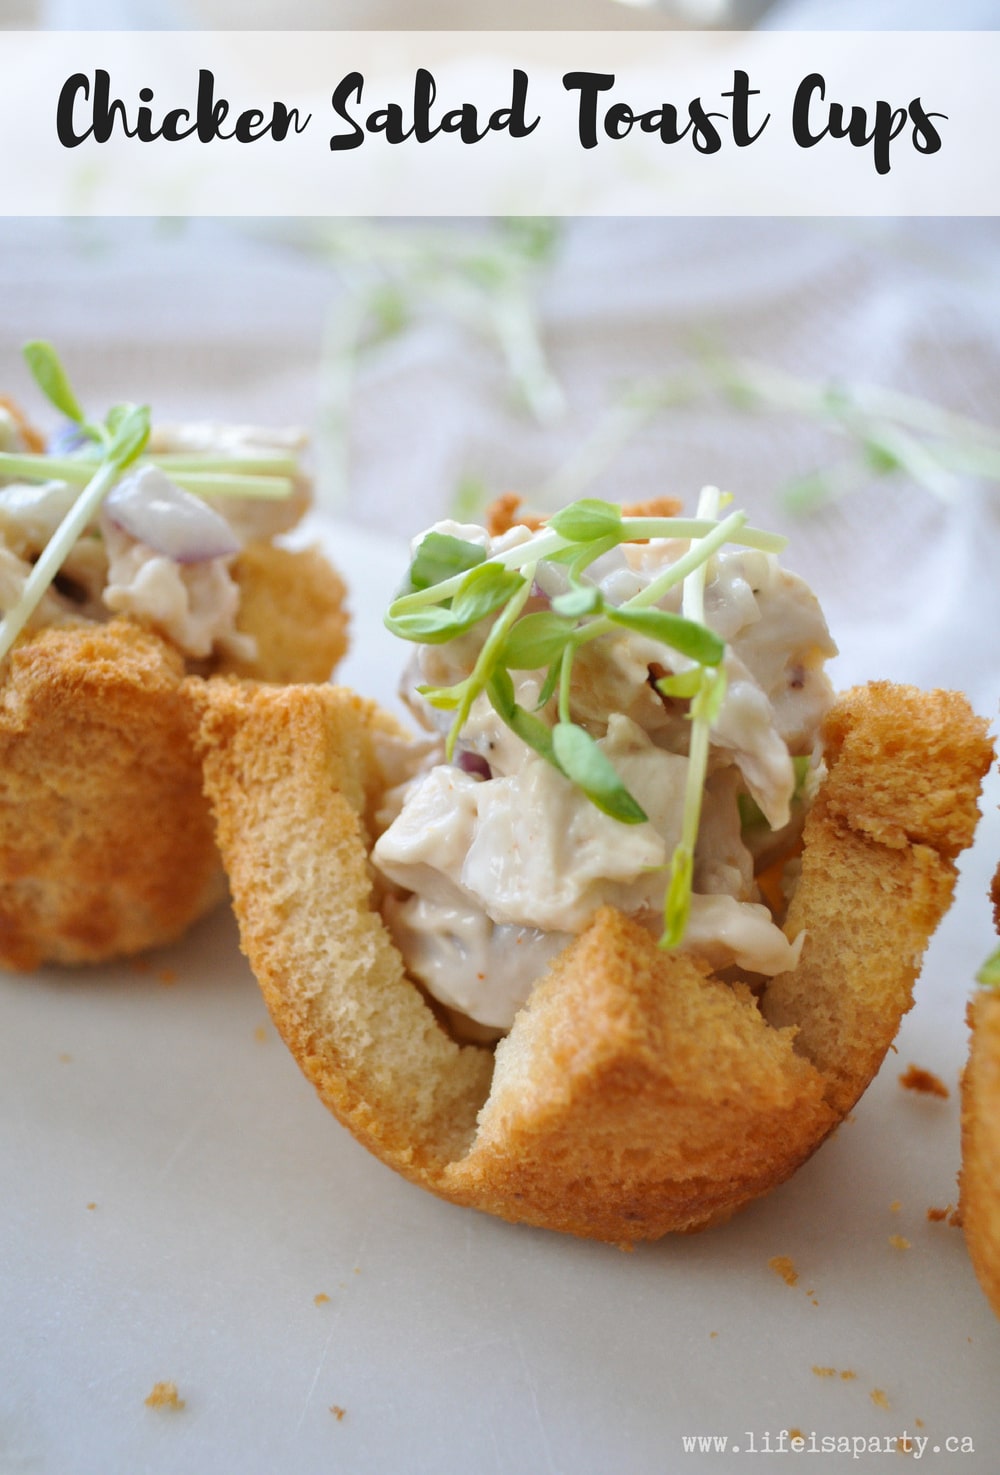 Chicken Salad Toast Cups: use store bought rotisserie chicken and regular old white bread to make these easy and delicious tea sandwiches. Perfect for a tea party or picnic.